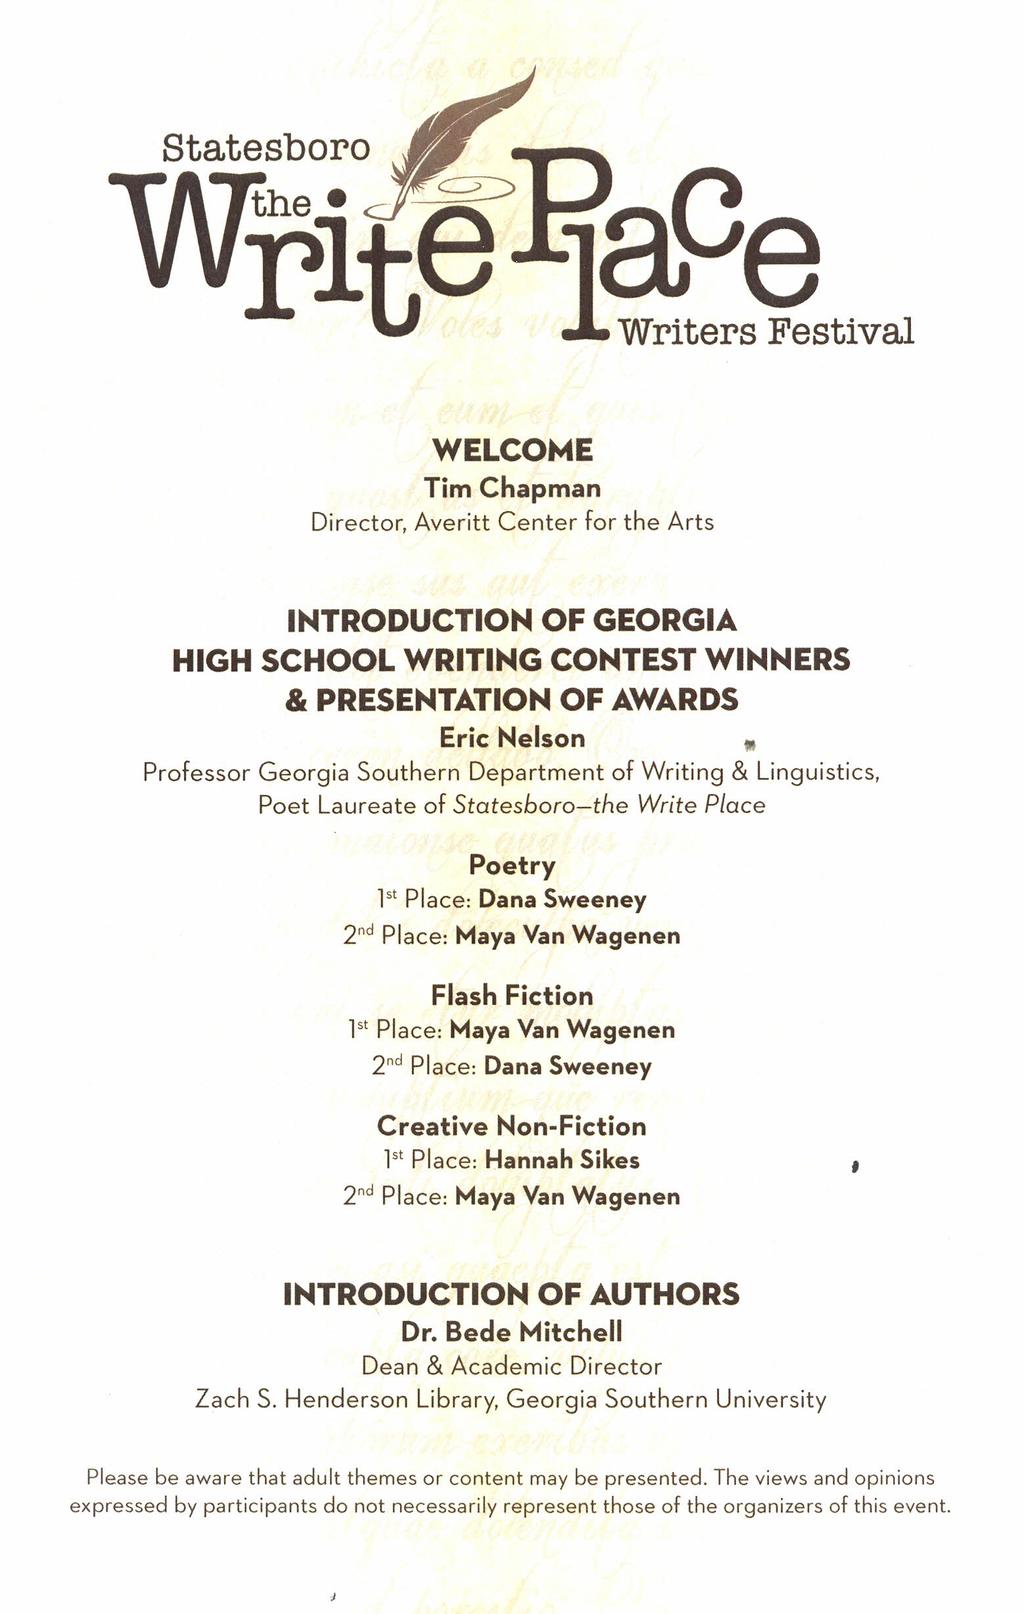 r t }Writers Festival WELCOME Tim Chapman Director, Averitt Center for the Arts INTRODUCTION OF GEORGIA HIGH SCHOOL WRITING CONTEST WINNERS & PRESENTATION OF AWARDS Eric Nelson _ Professor Georgia